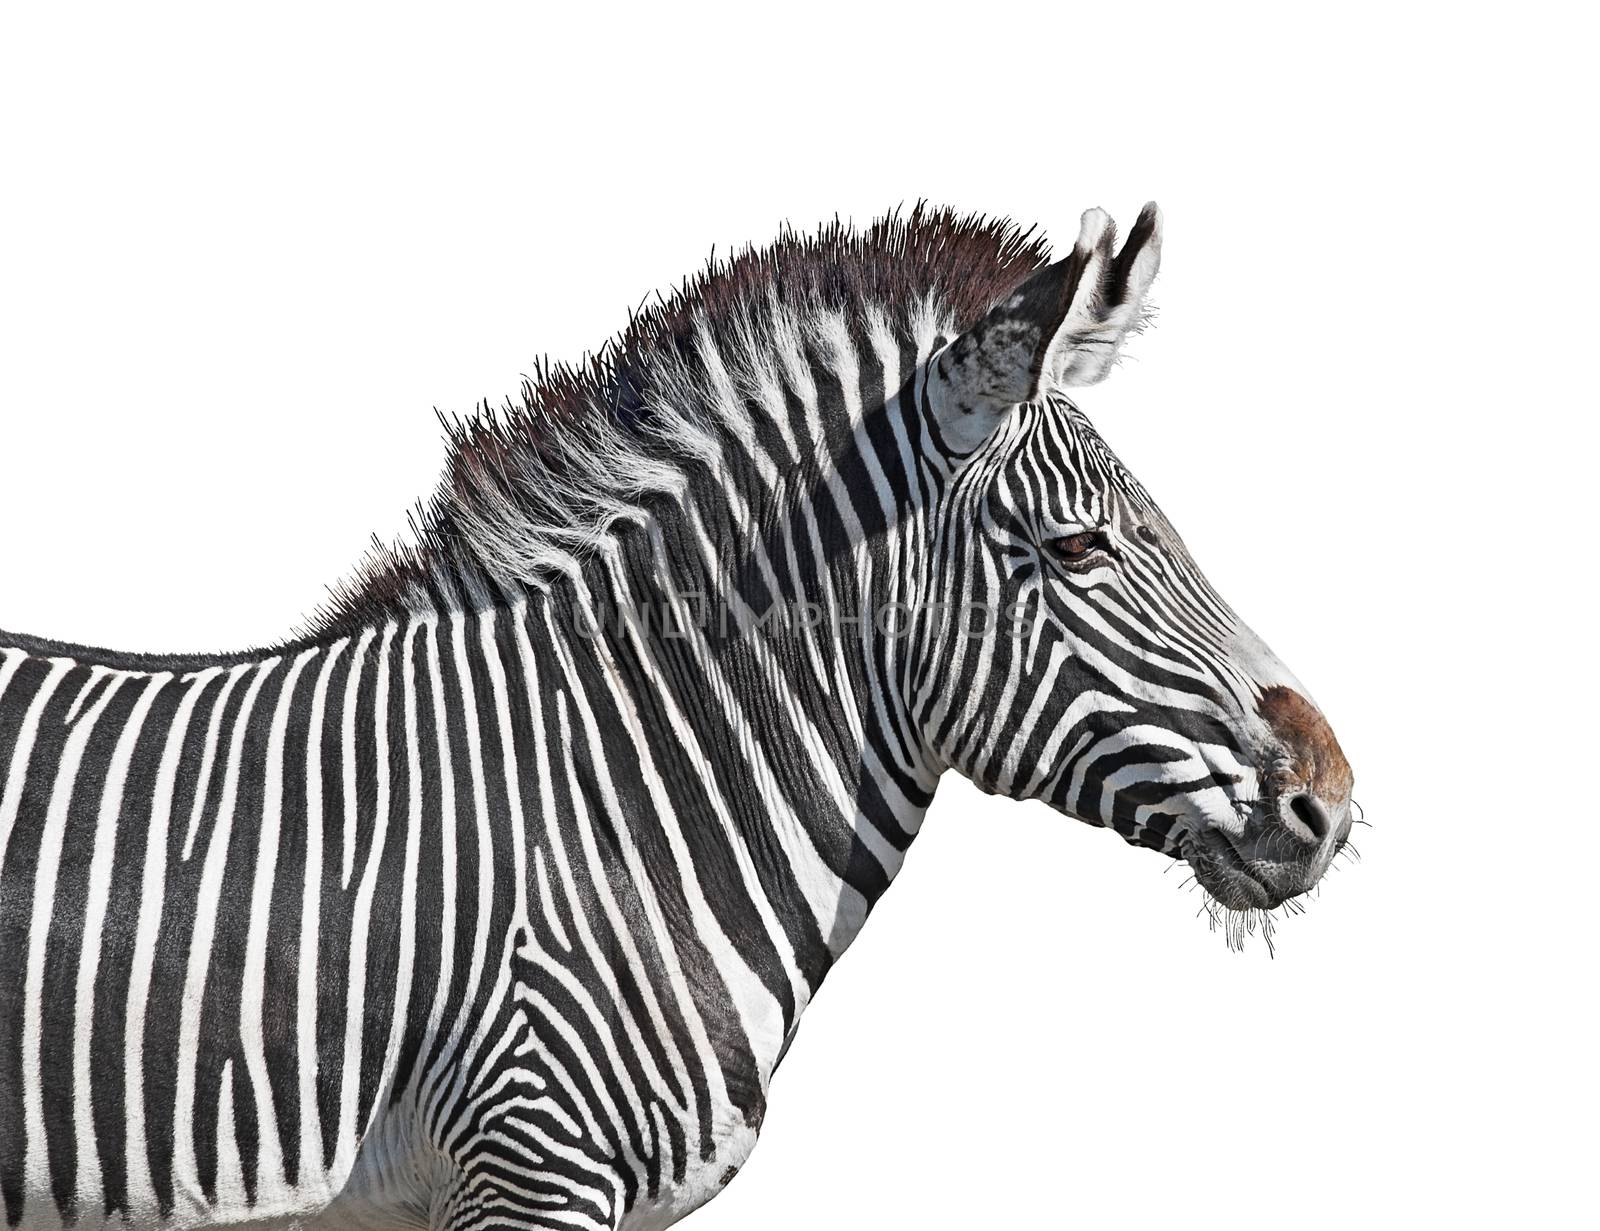 Grevy's zebra close-up isolated on white background with clipping path